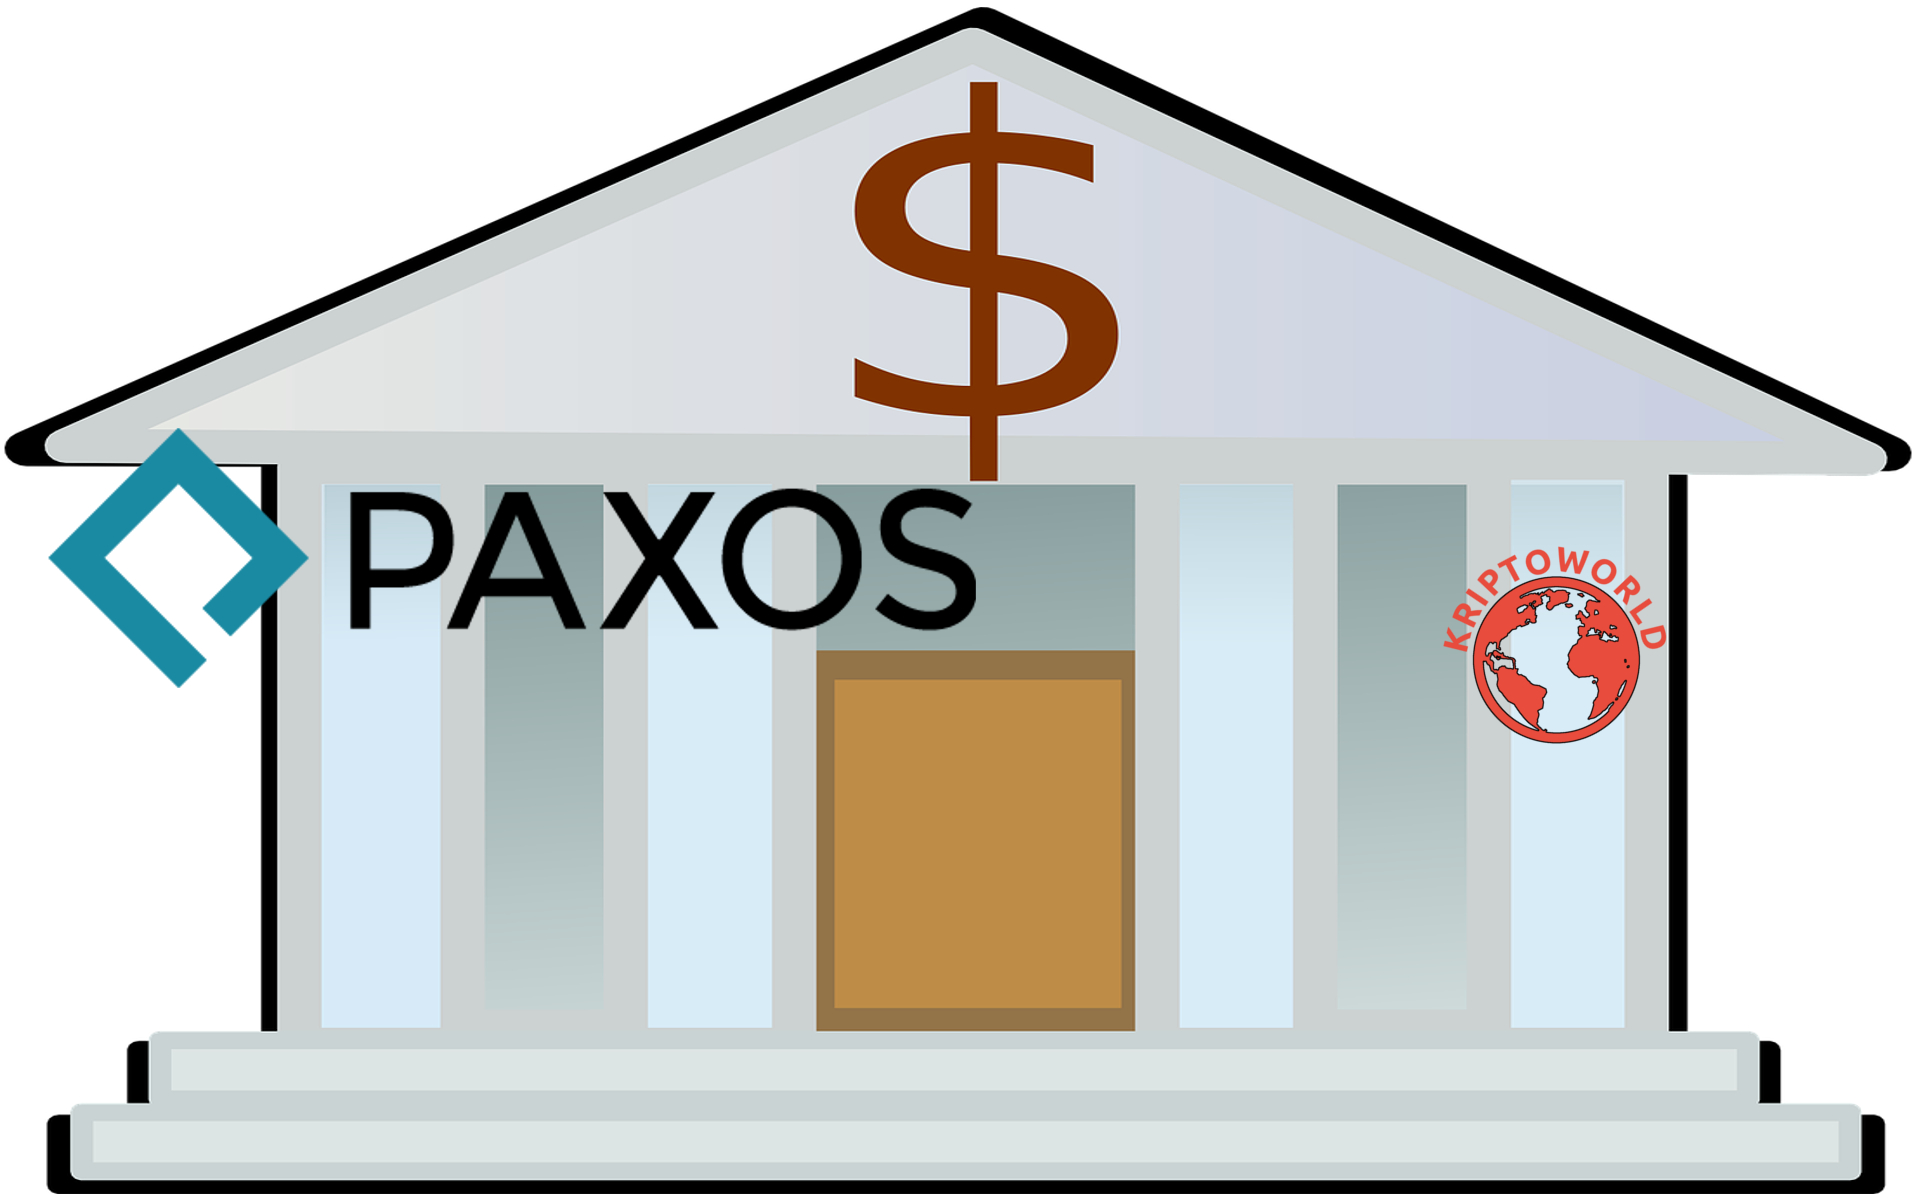 Paxos has obtained "conditional approval" to set up a US bank